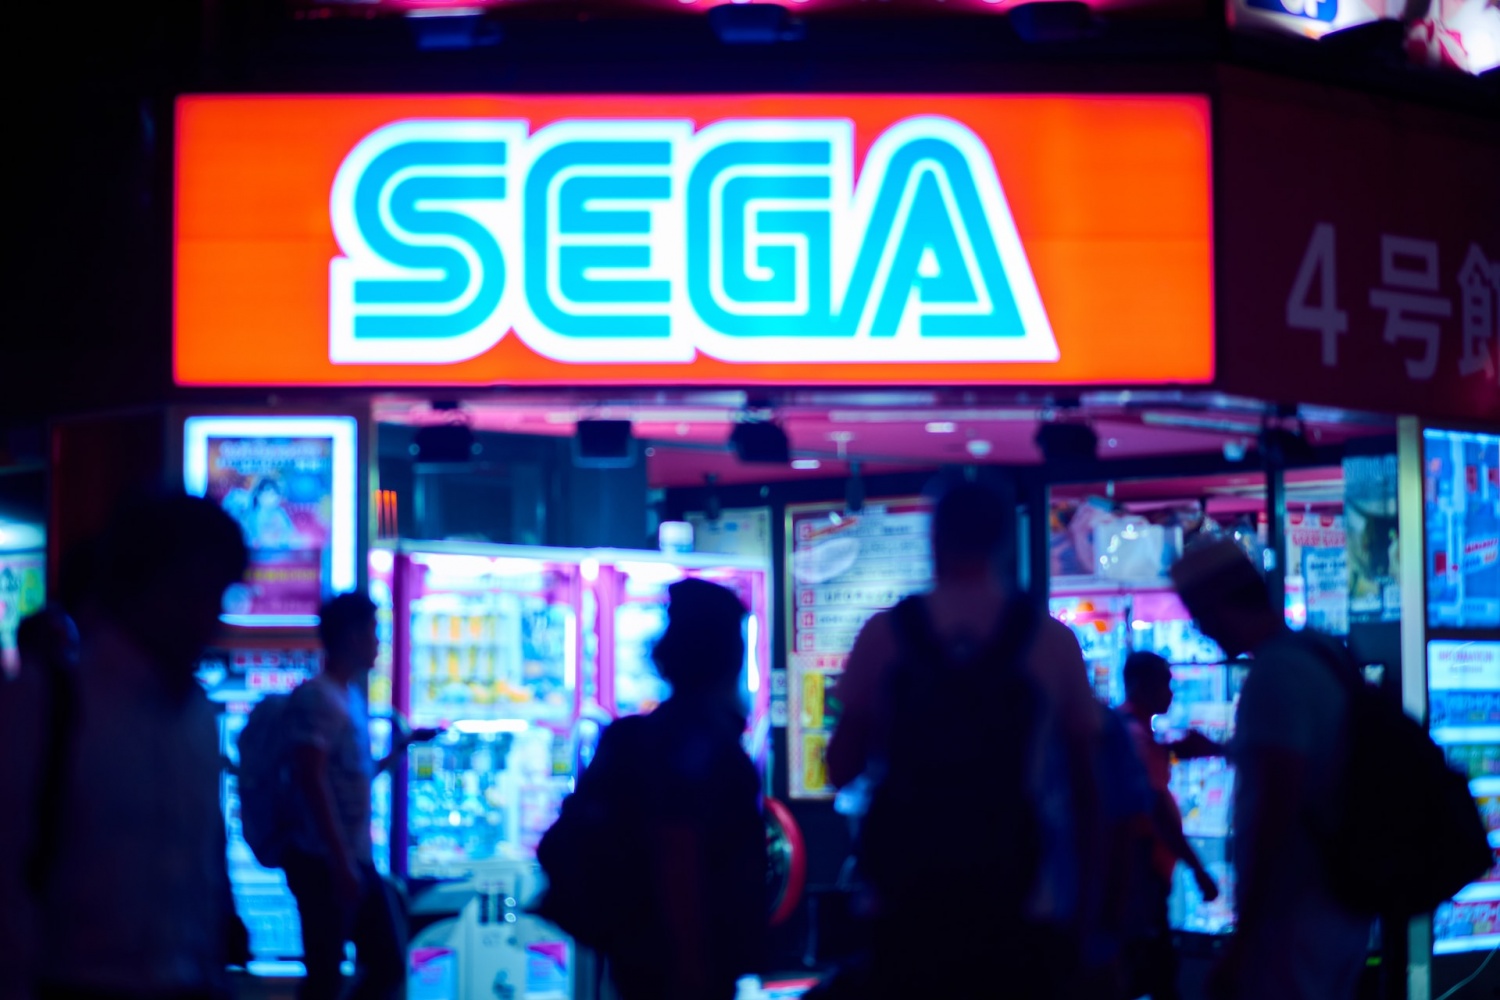 Sega Game Sales See Decline as Hopes for Total War, Persona, and Others Can Drive More Units